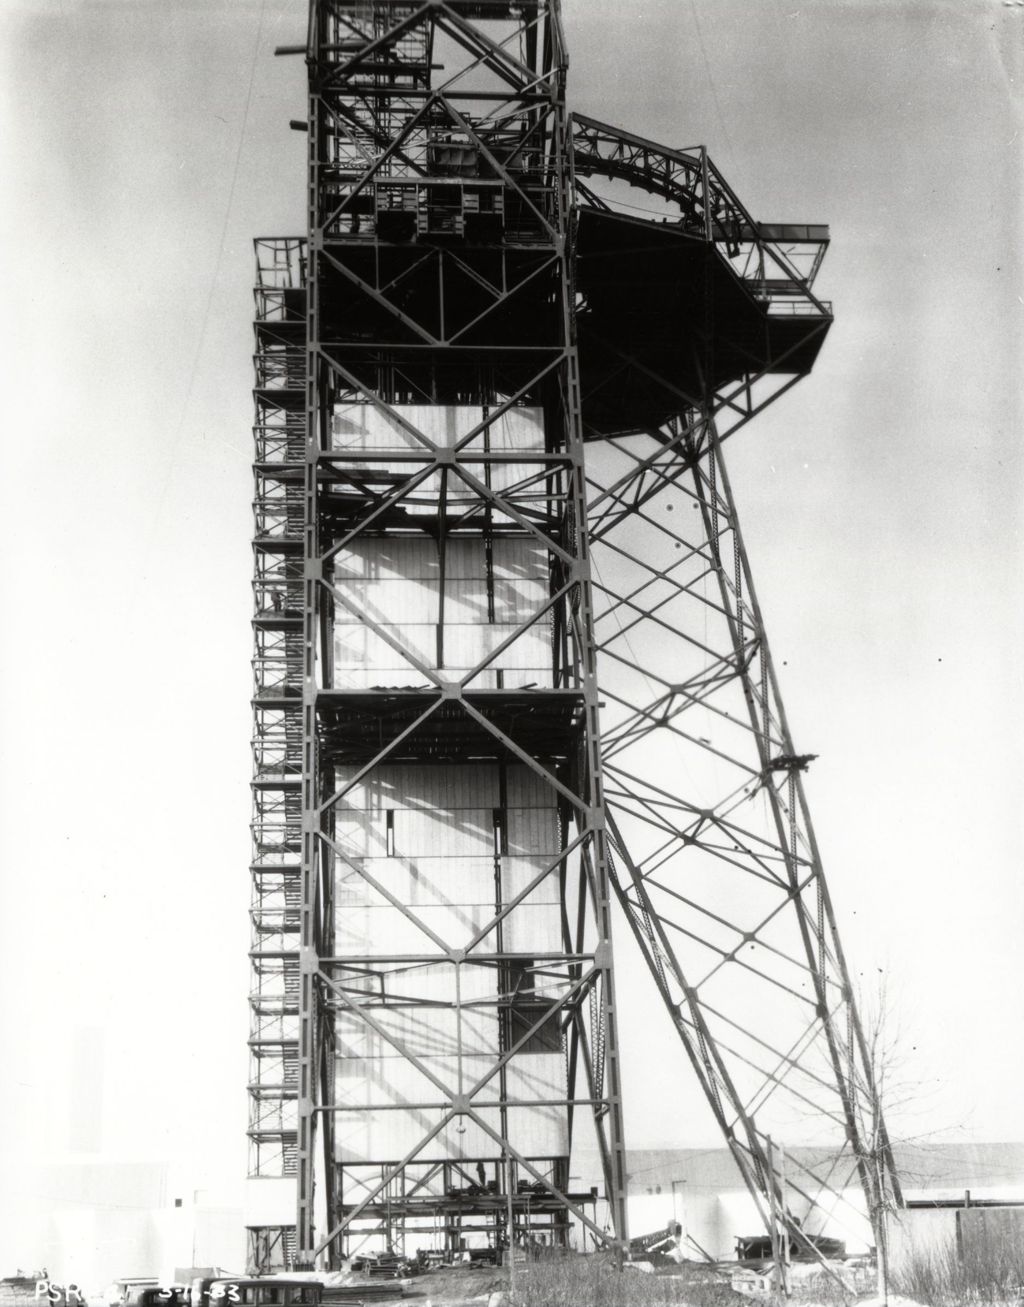 Construction of the one of the Century of Progress Skyride towers